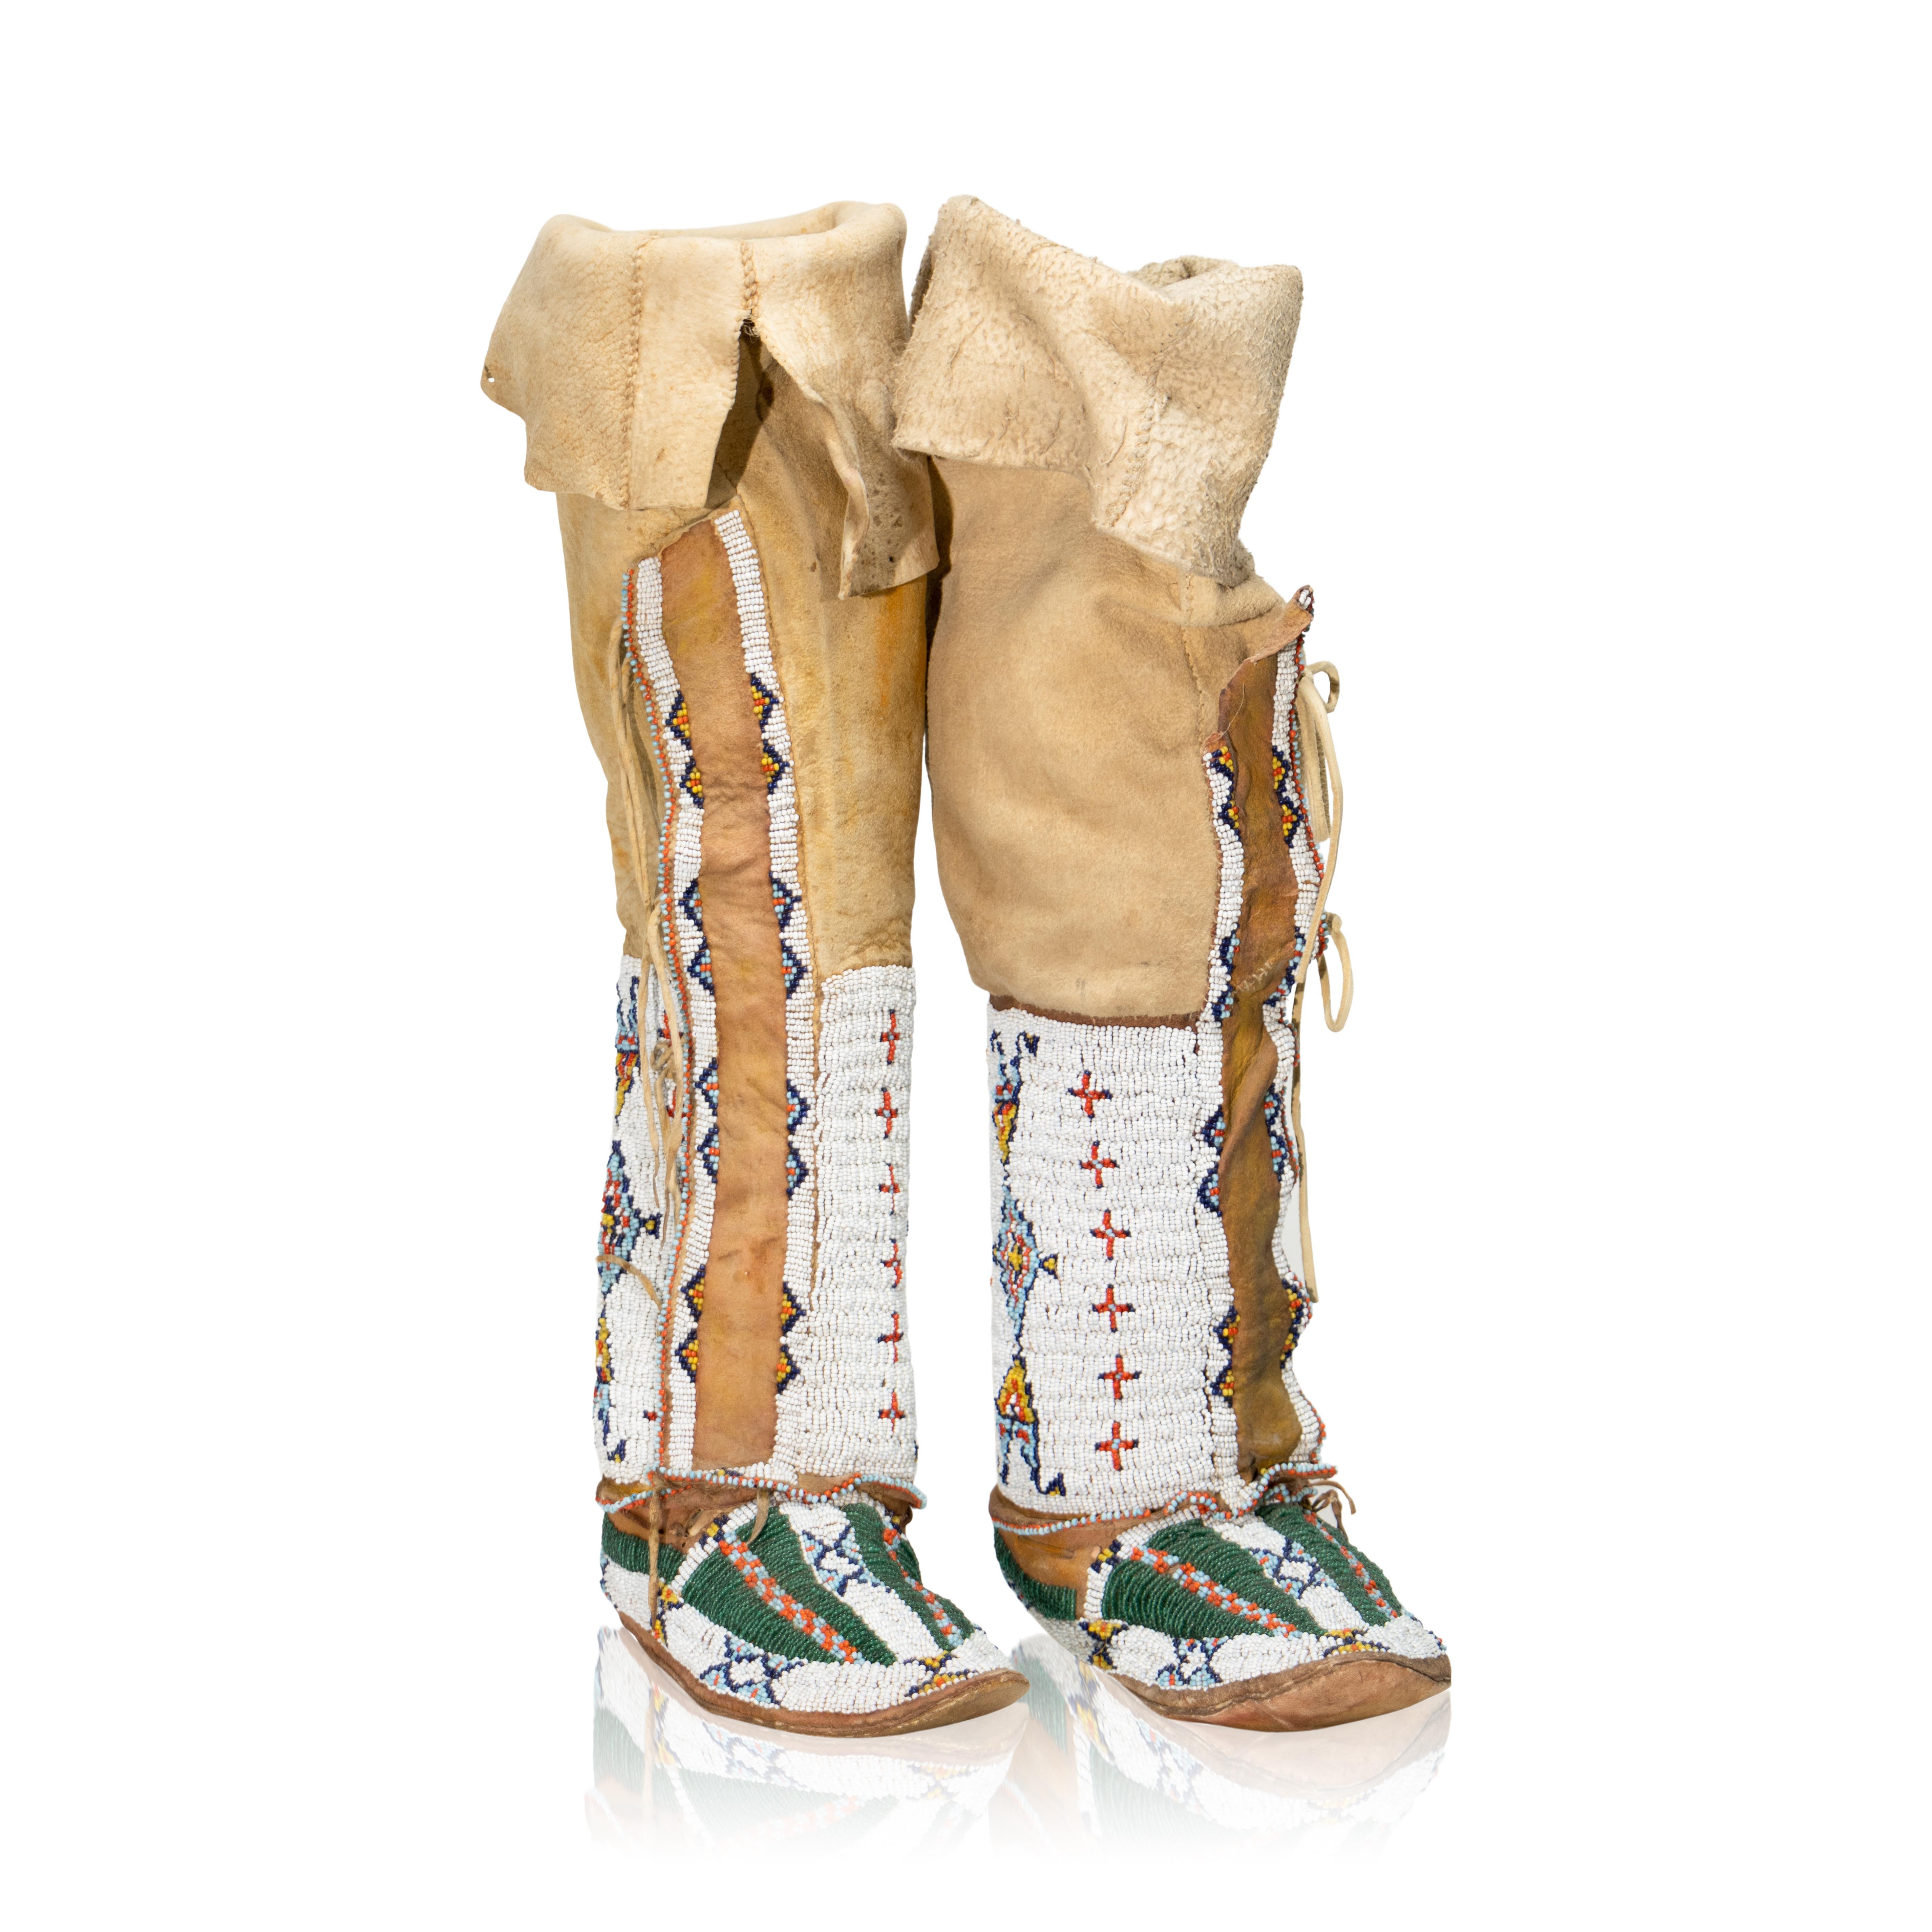 This is an outstanding set of authentic original beaded hide high-top / high-top moccasins with hard parfleche soles from the Sioux Native American Indians dating to circa 1880. The set shows stiff Indian tanned hide moccasins with hard parfleche